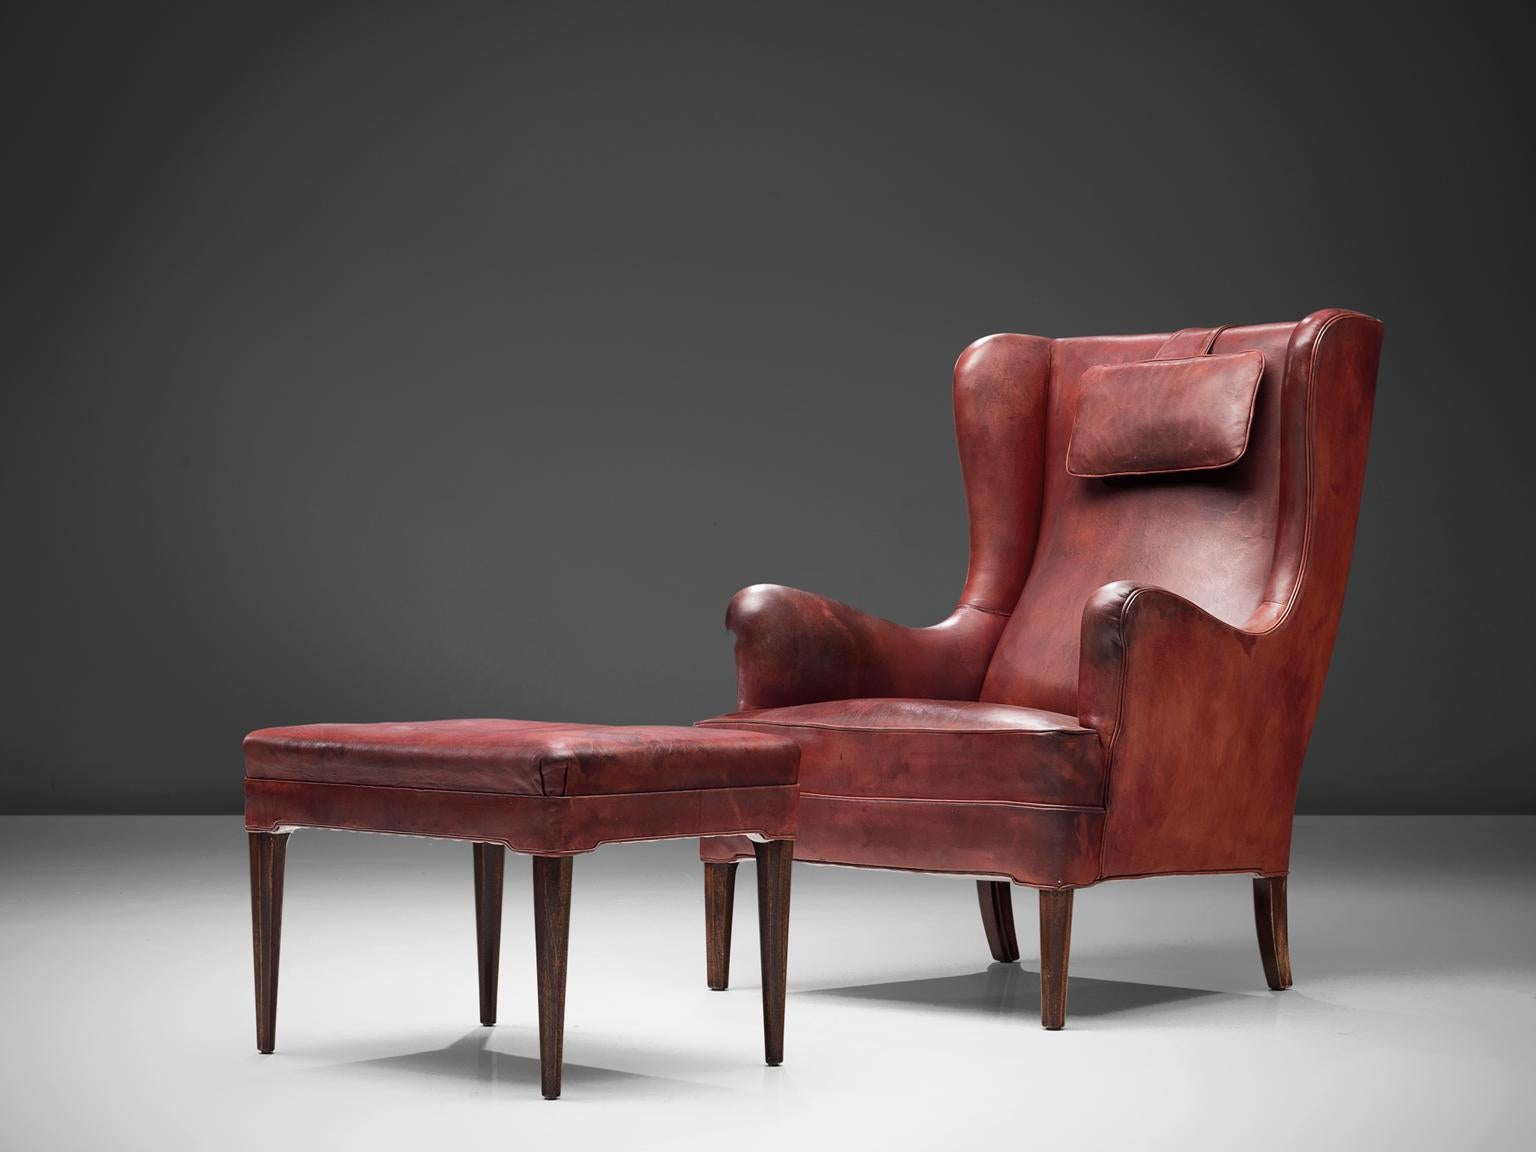 Frits Heningsen, lounge chair with ottoman, leather, Denmark, 1940s
 
Danish wingback lounge chair by Frits Heningsen (1889-1965) in the 1940s. Both the chair and the ottoman are fully restored and feature their original leather that shows admirable